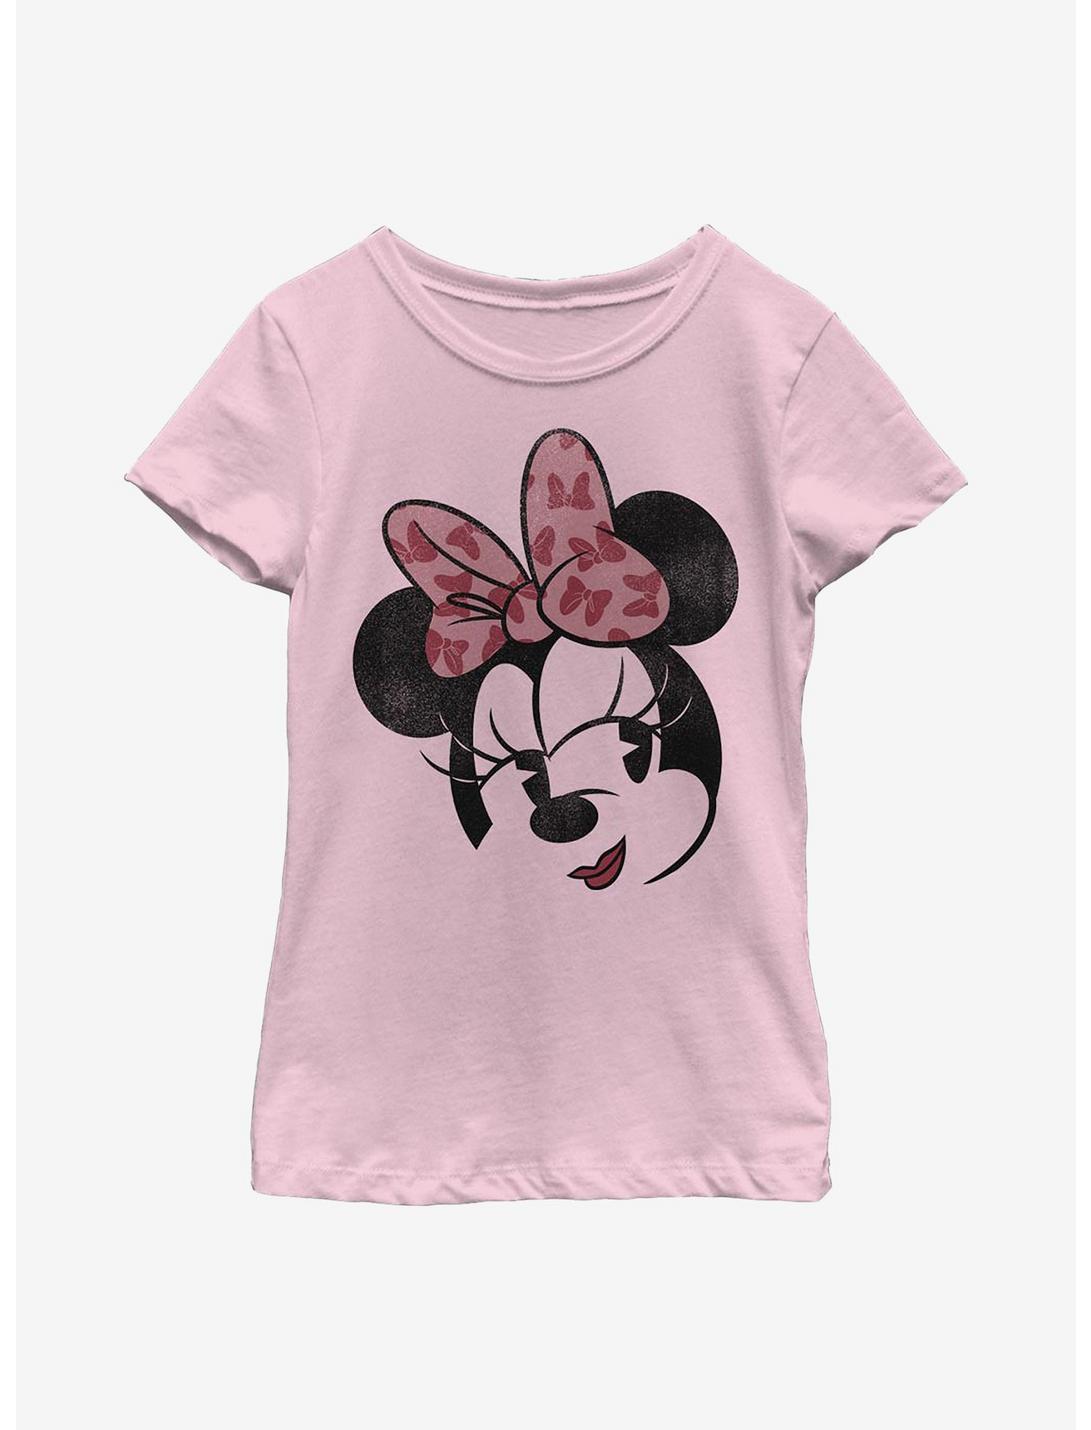 Disney Minnie Mouse Face Youth Girls T-Shirt, PINK, hi-res